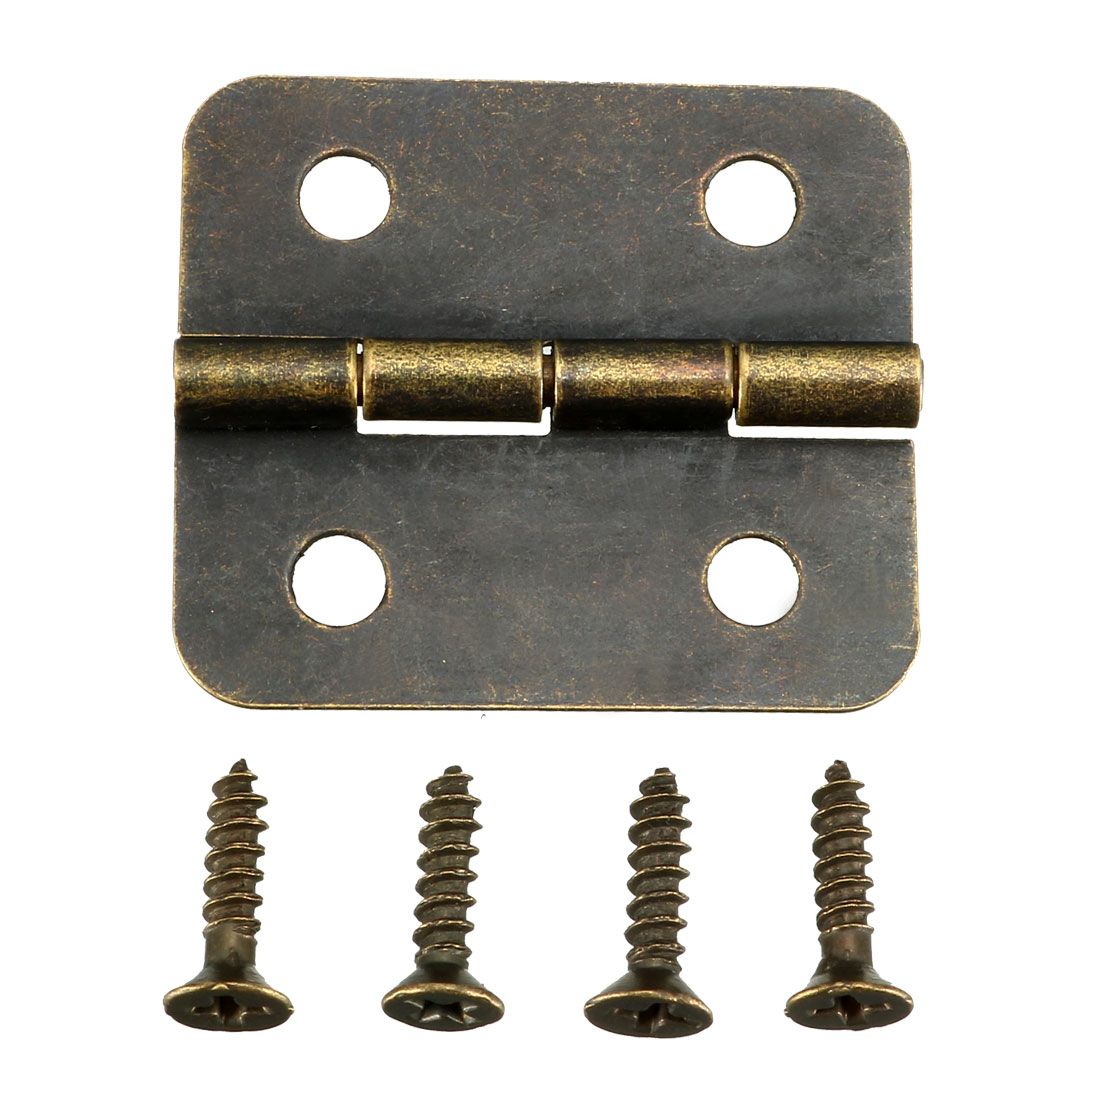 Uxcell 1.18" Antique Bronze  Hinges Retro  Hinge Replacement with Screws 10pcs - image 2 of 5